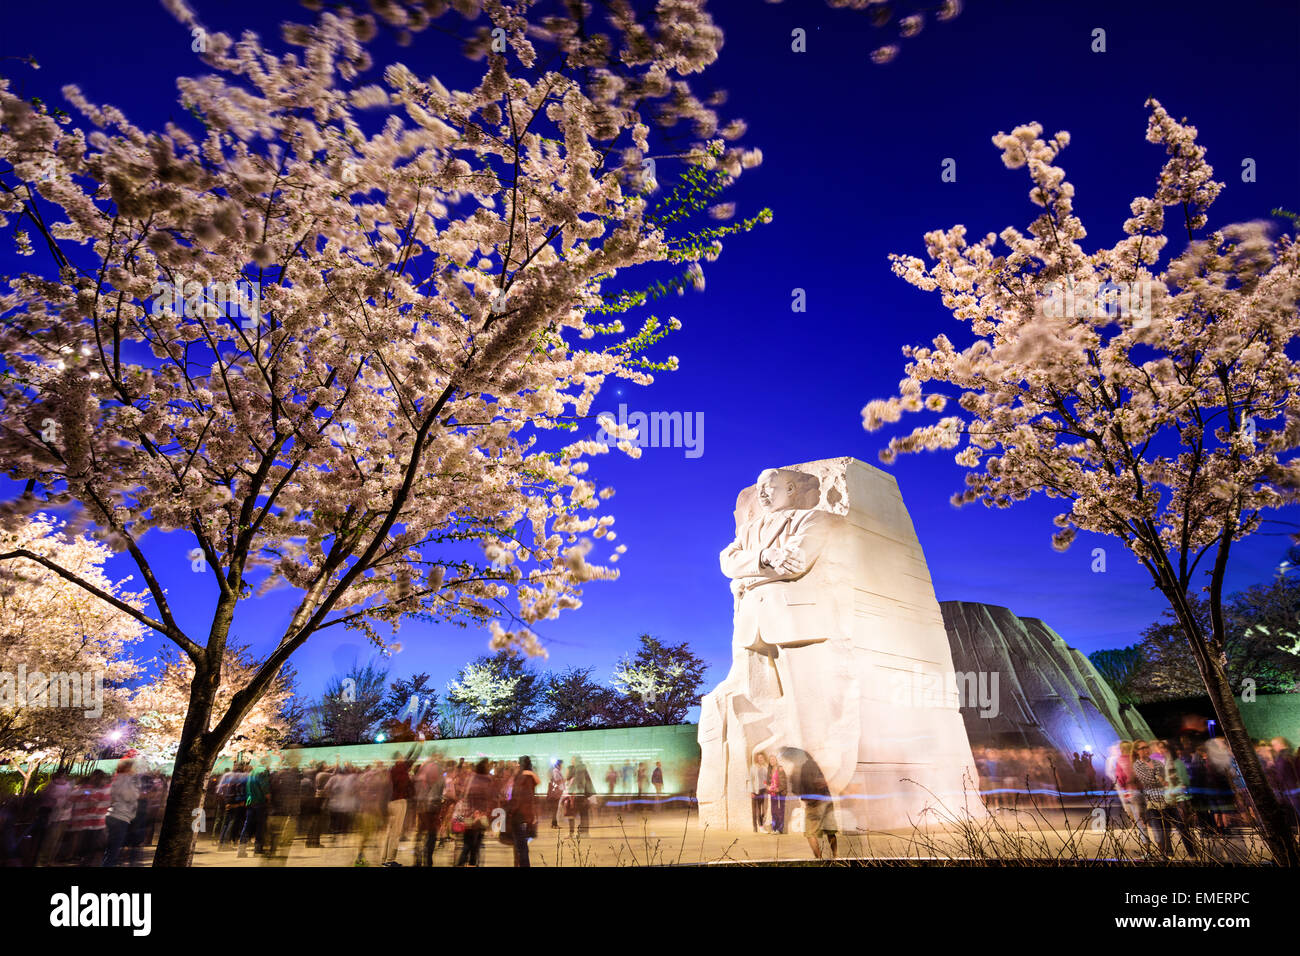 Crowds gather under the Martin Luther King, Jr. Memorial in West Potomac Park in Washington DC. Stock Photo